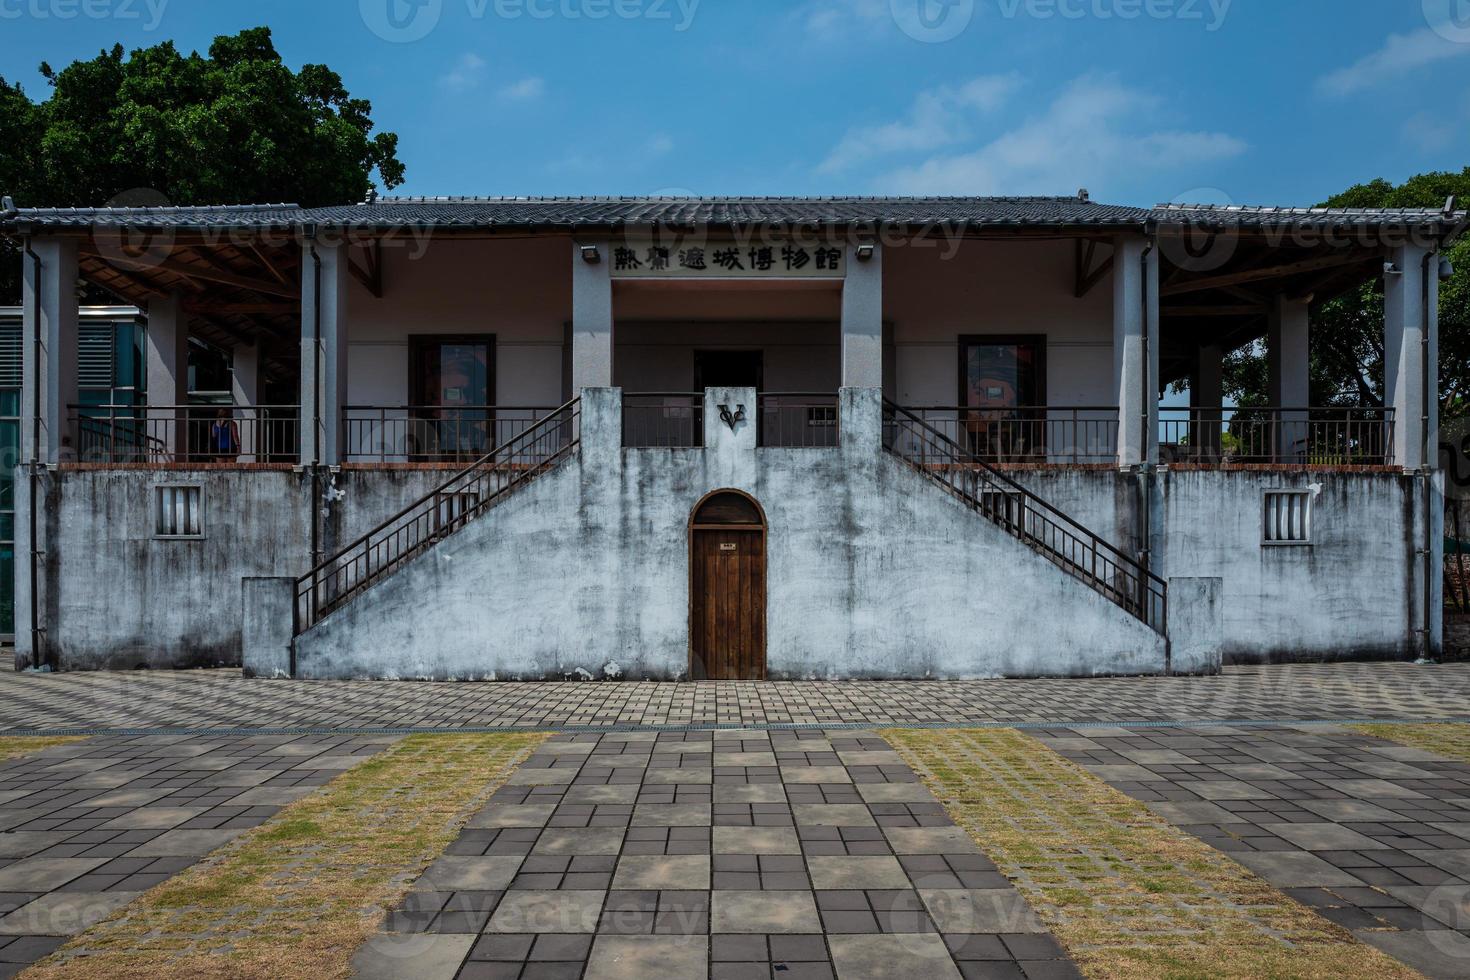 Building at the Tainan Fort Zeelandia in Tainan in Taiwan photo